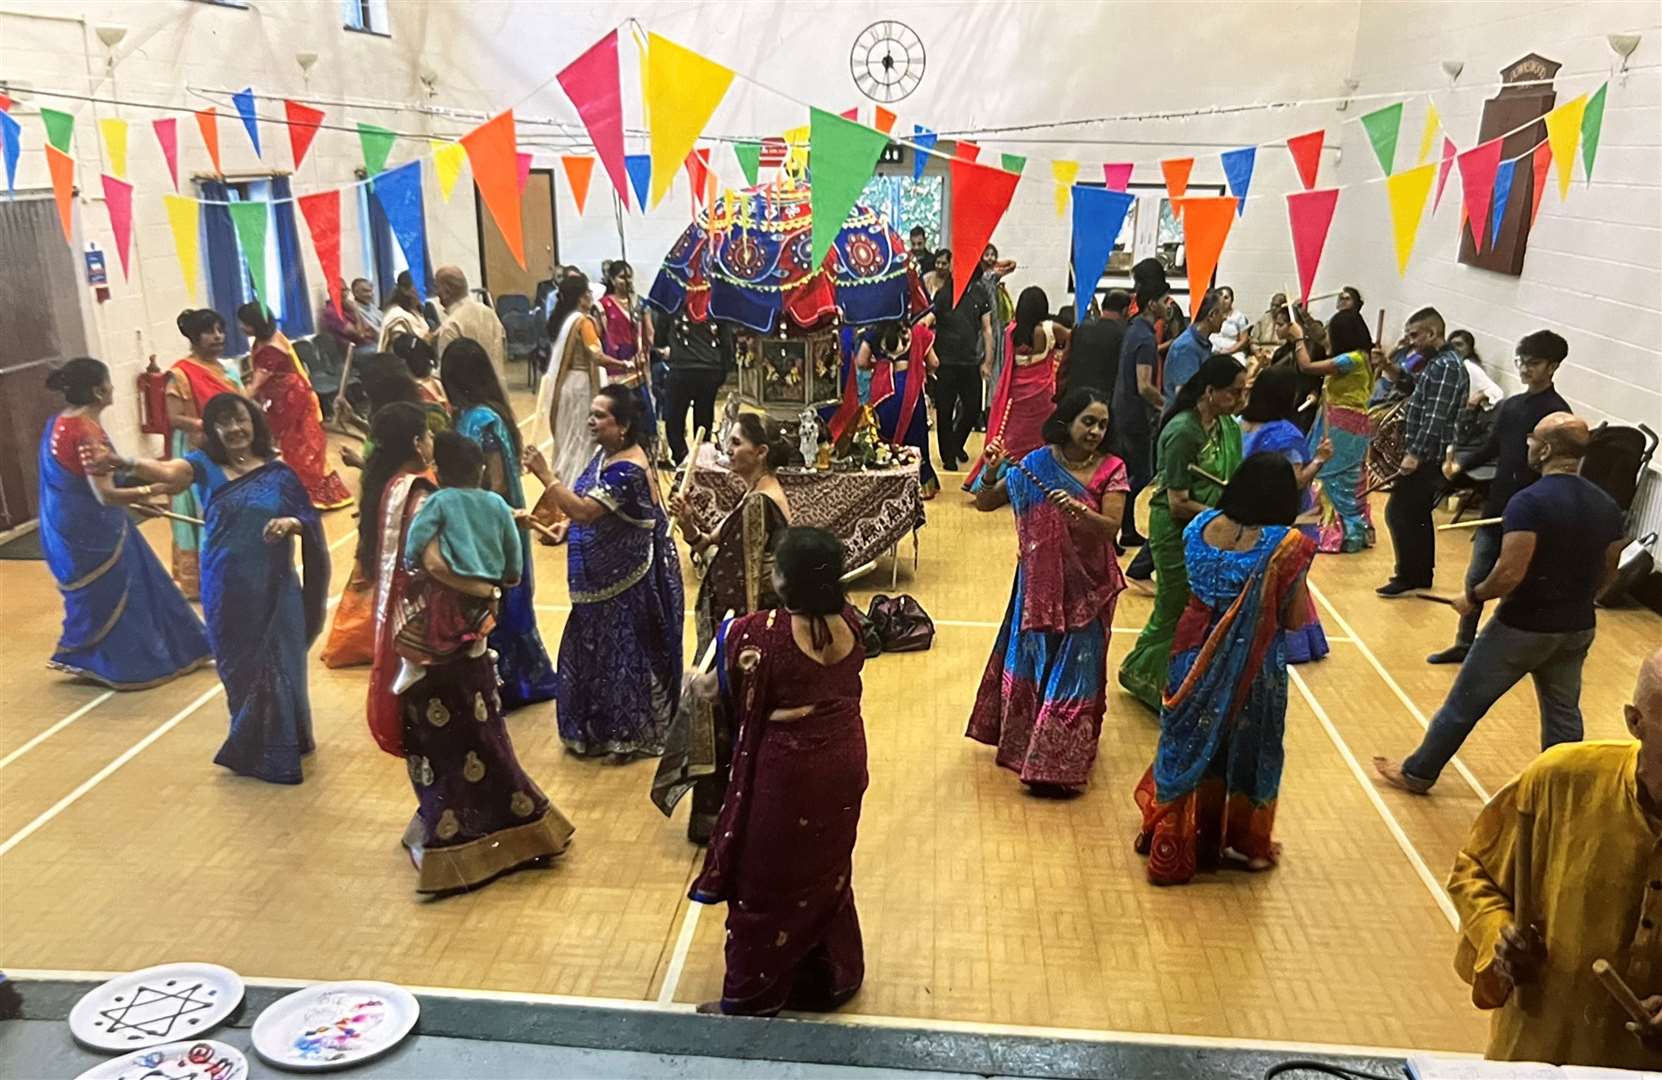 The Indian community participating in the nine-day hindu festival, Navatri